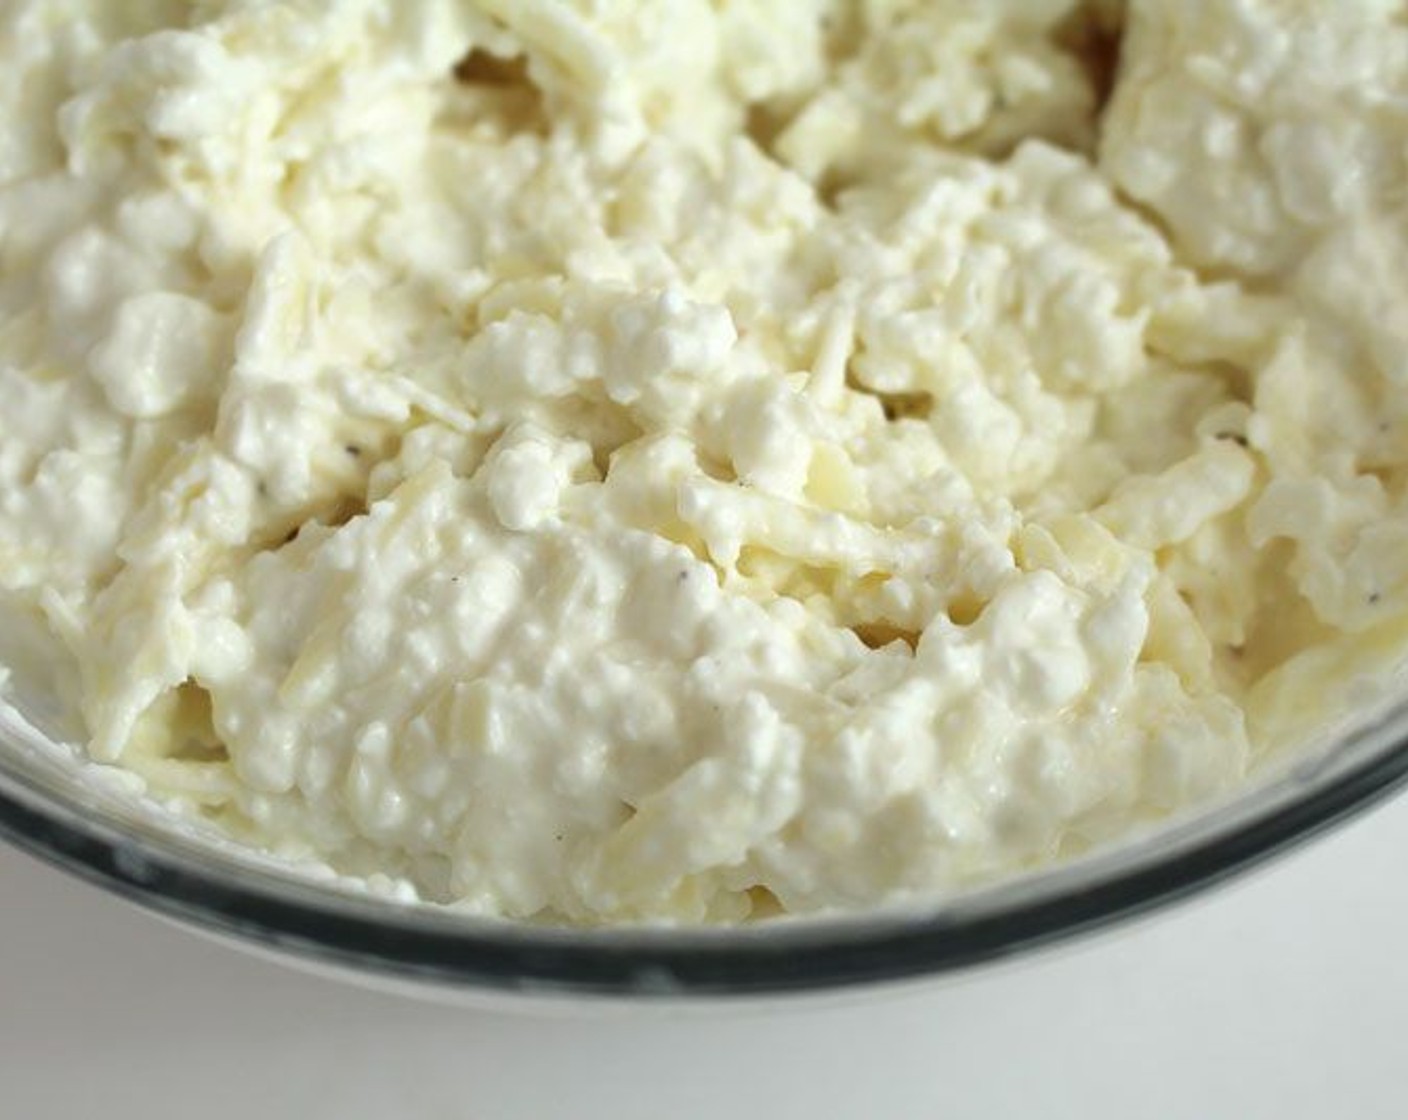 step 4 Mix together Cottage Cheese (2 cups), Greek Yogurt (1/2 cup), Mozzarella Cheese (1 1/2 cups), reserving the rest for later, Parmesan Cheese (1/2 cup), Salt (to taste) and Ground Black Pepper (to taste) for the cheese filling.